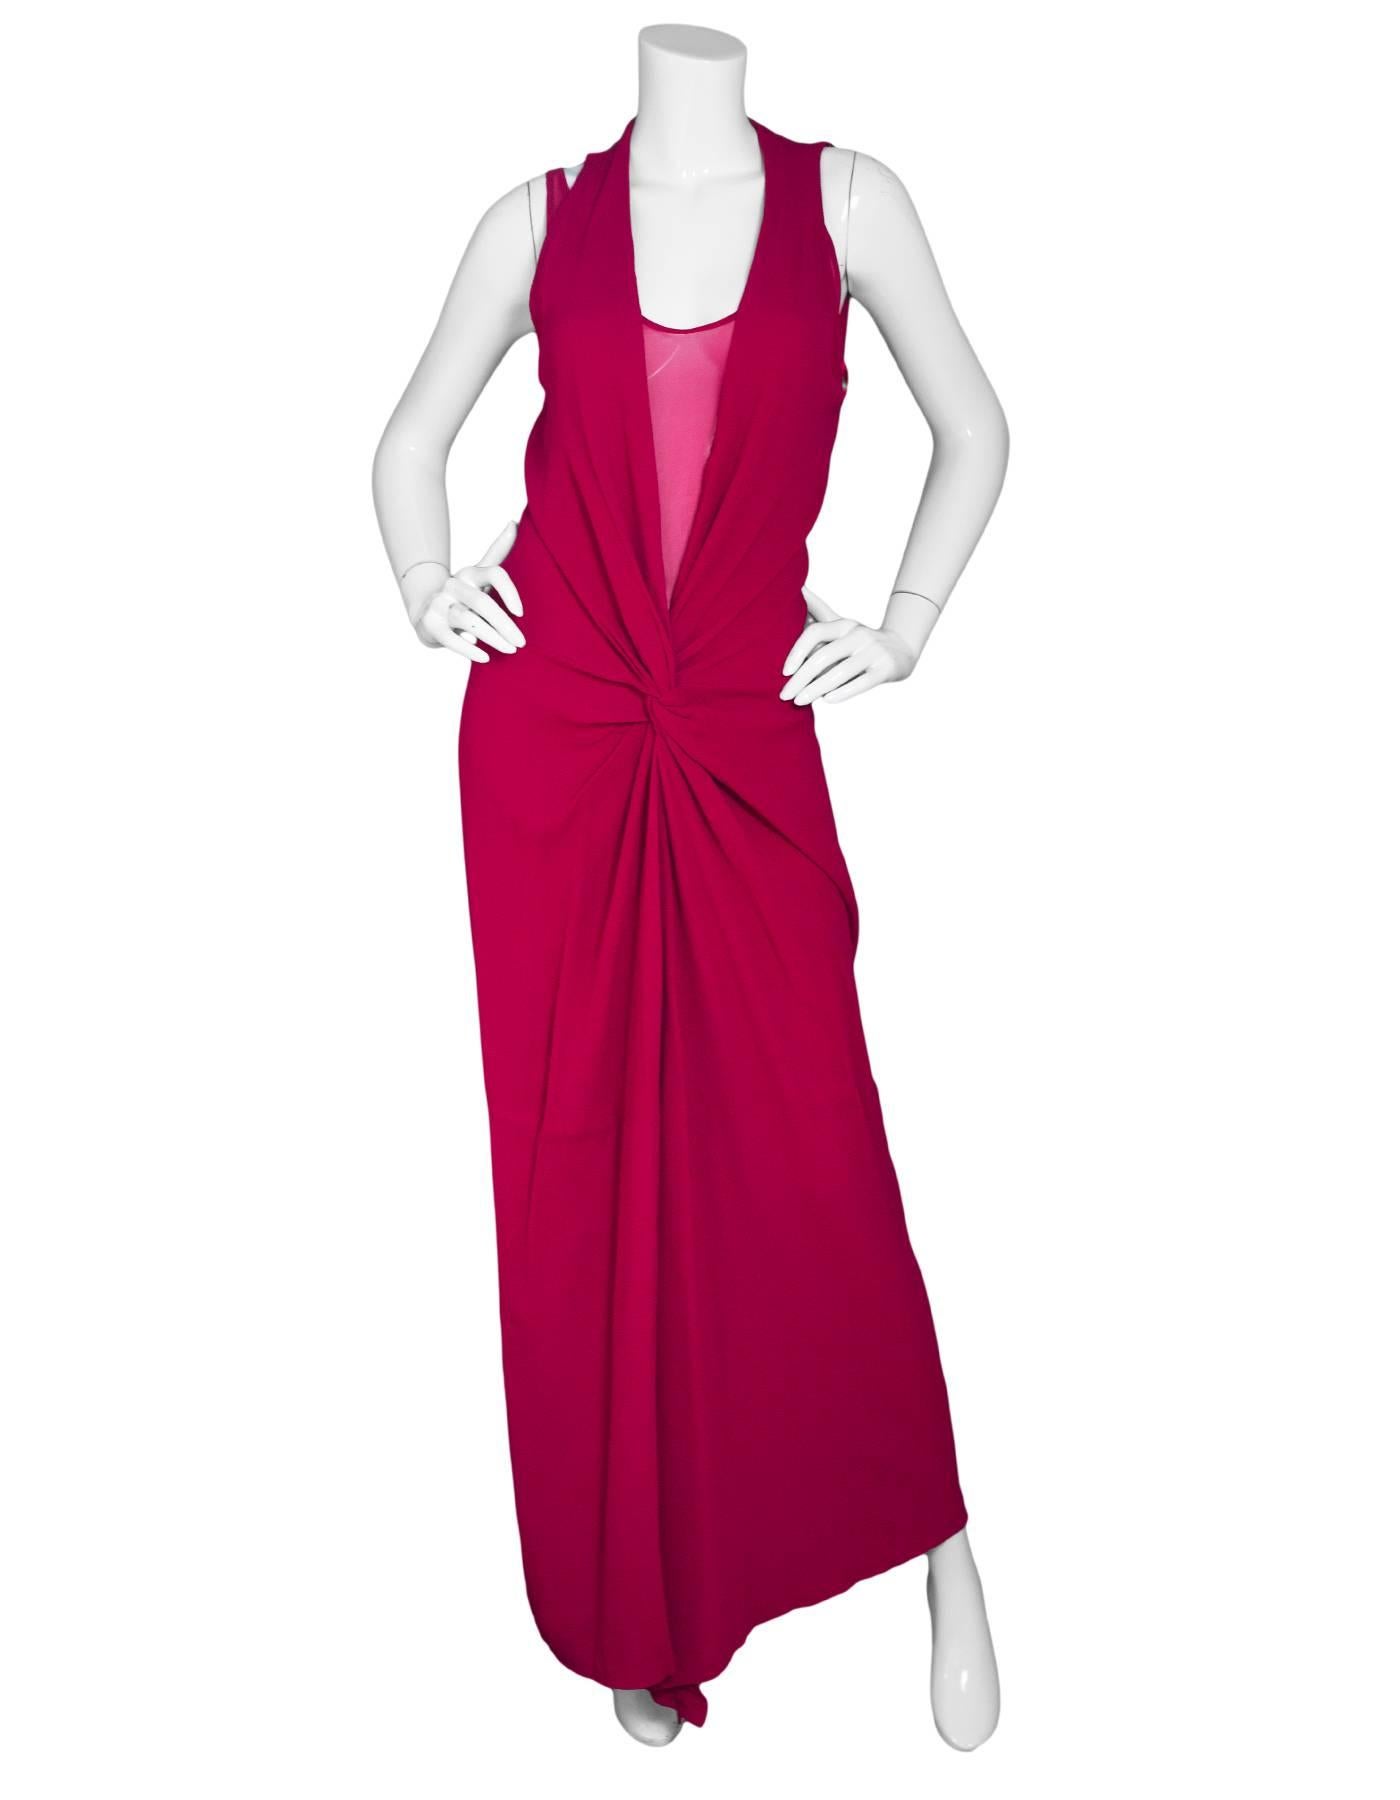 Diane von Furstenberg Red Gown Sz 4 NWT

Made In: China
Color: Red
Composition: 100% polyester
Lining: Red slip
Closure/Opening: Pull over
Exterior Pockets: None
Overall Condition: Excellent pre-owned condition - NWT
Included: DVF tag
Marked Size: